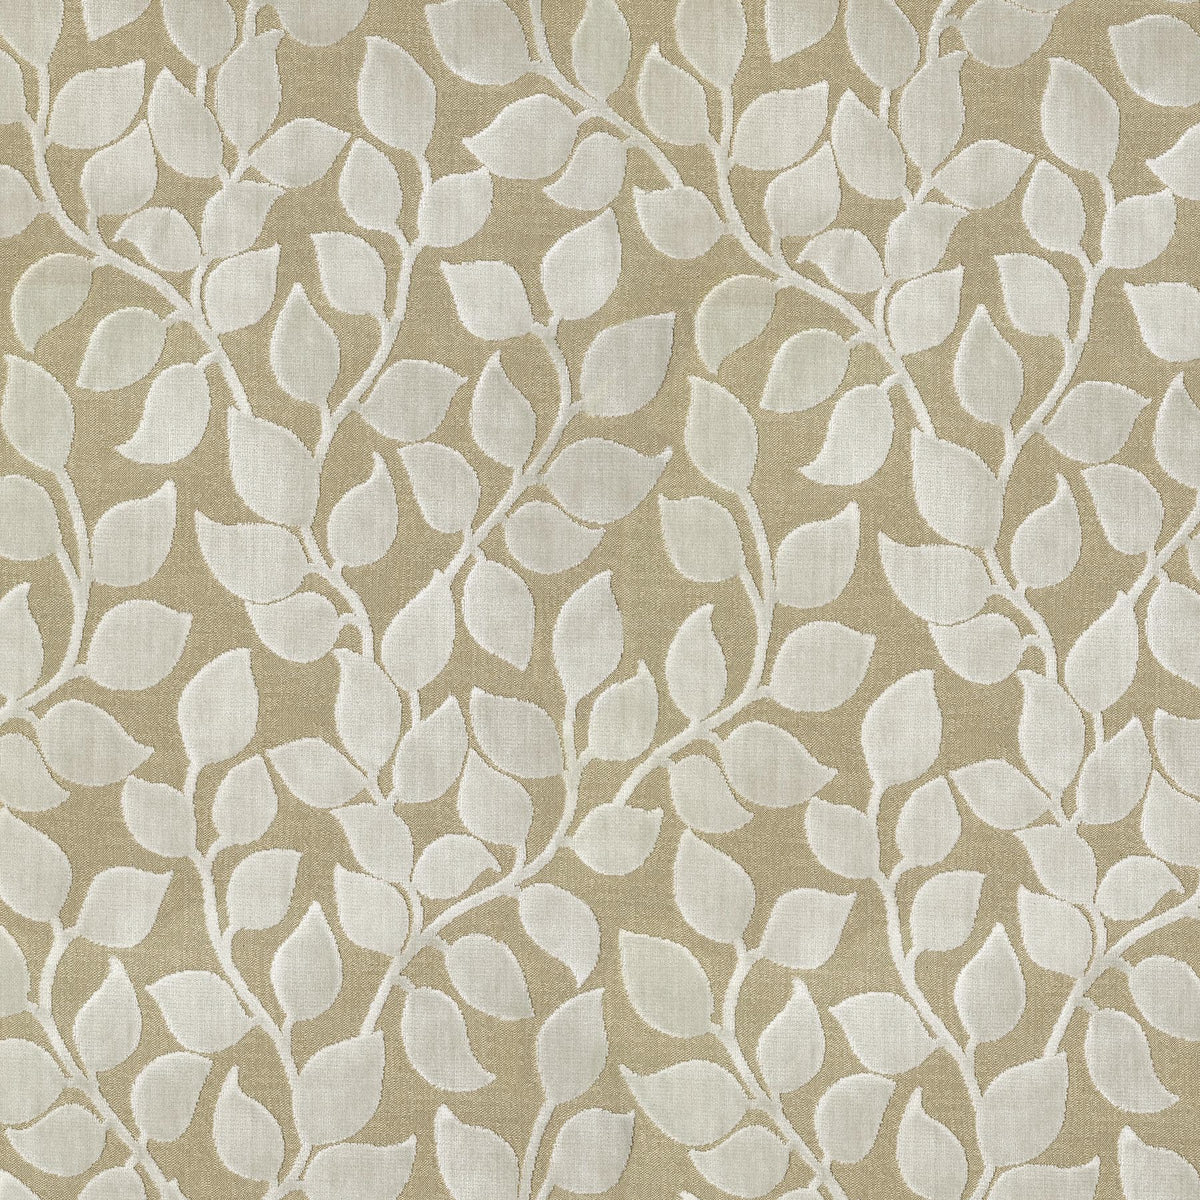 P/K Lifestyles Lovely Leaf - Cloud 411267 Fabric Swatch